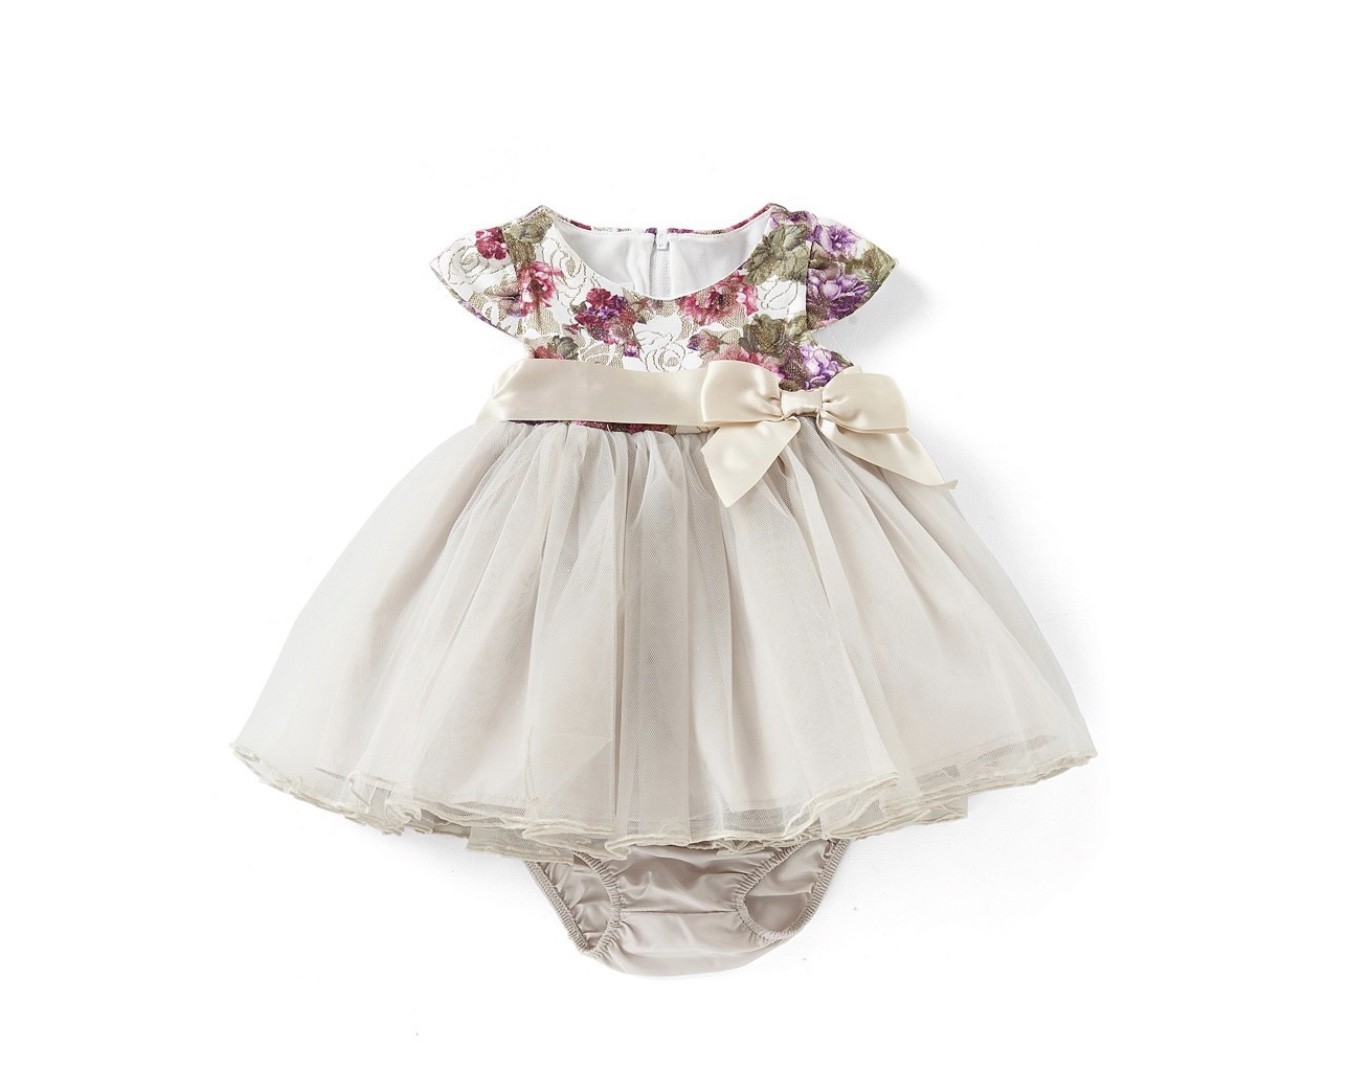 BONNIE JEAN FLORAL AND LACE DRESS SIZES 0 TO 24 MONTHS